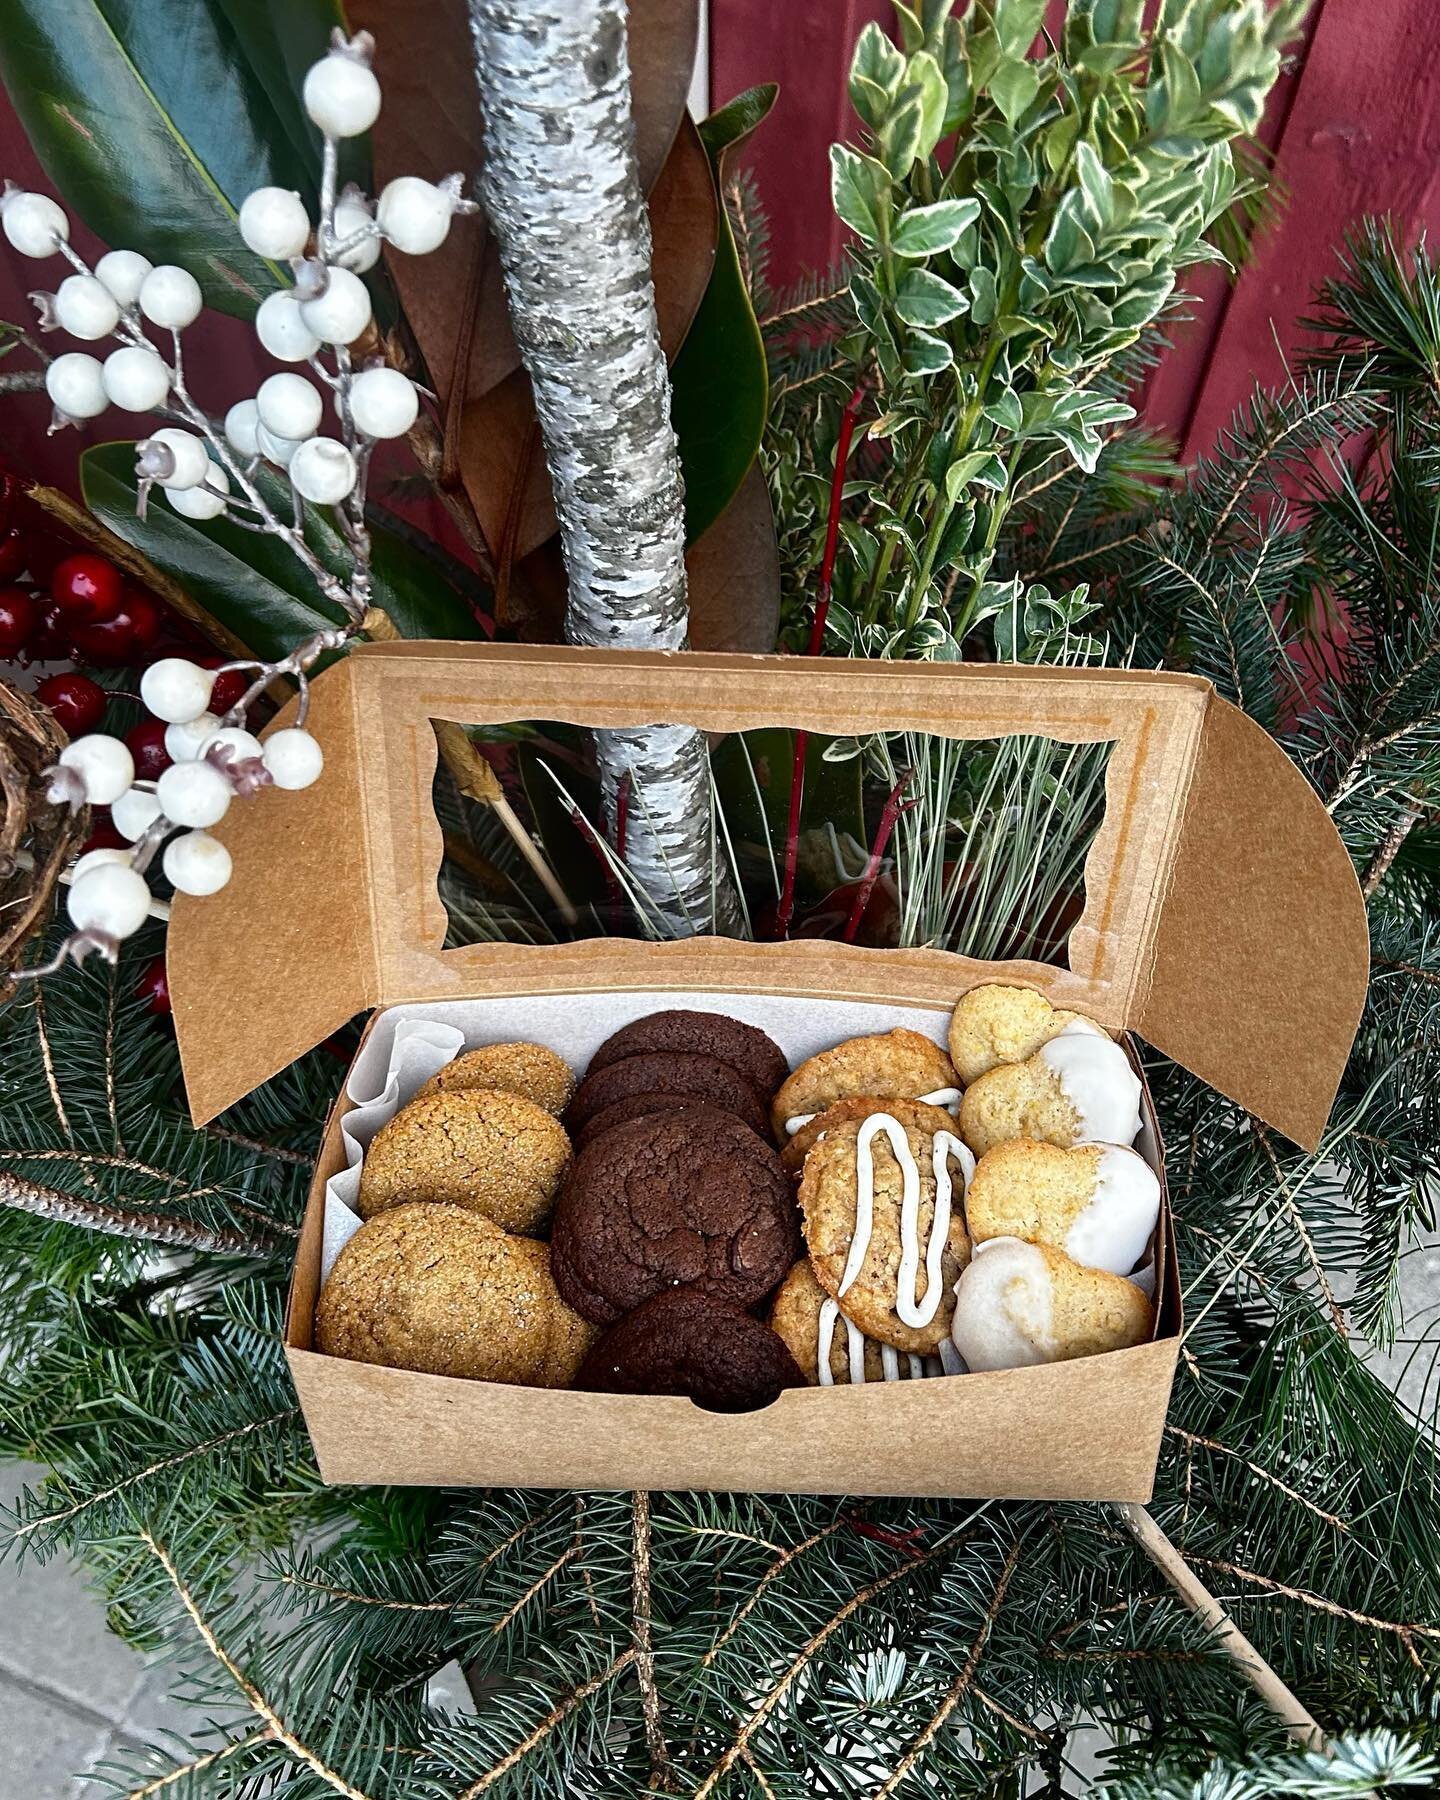 holiday cookie box 2023 ✨

rye ginger cookies 
rye brownie cookies 
oatmeal walnut 
orange spelt spritz 

available everyday!! pre order if you want to guarantee grabbing one as we only make a certain amount each day 💙